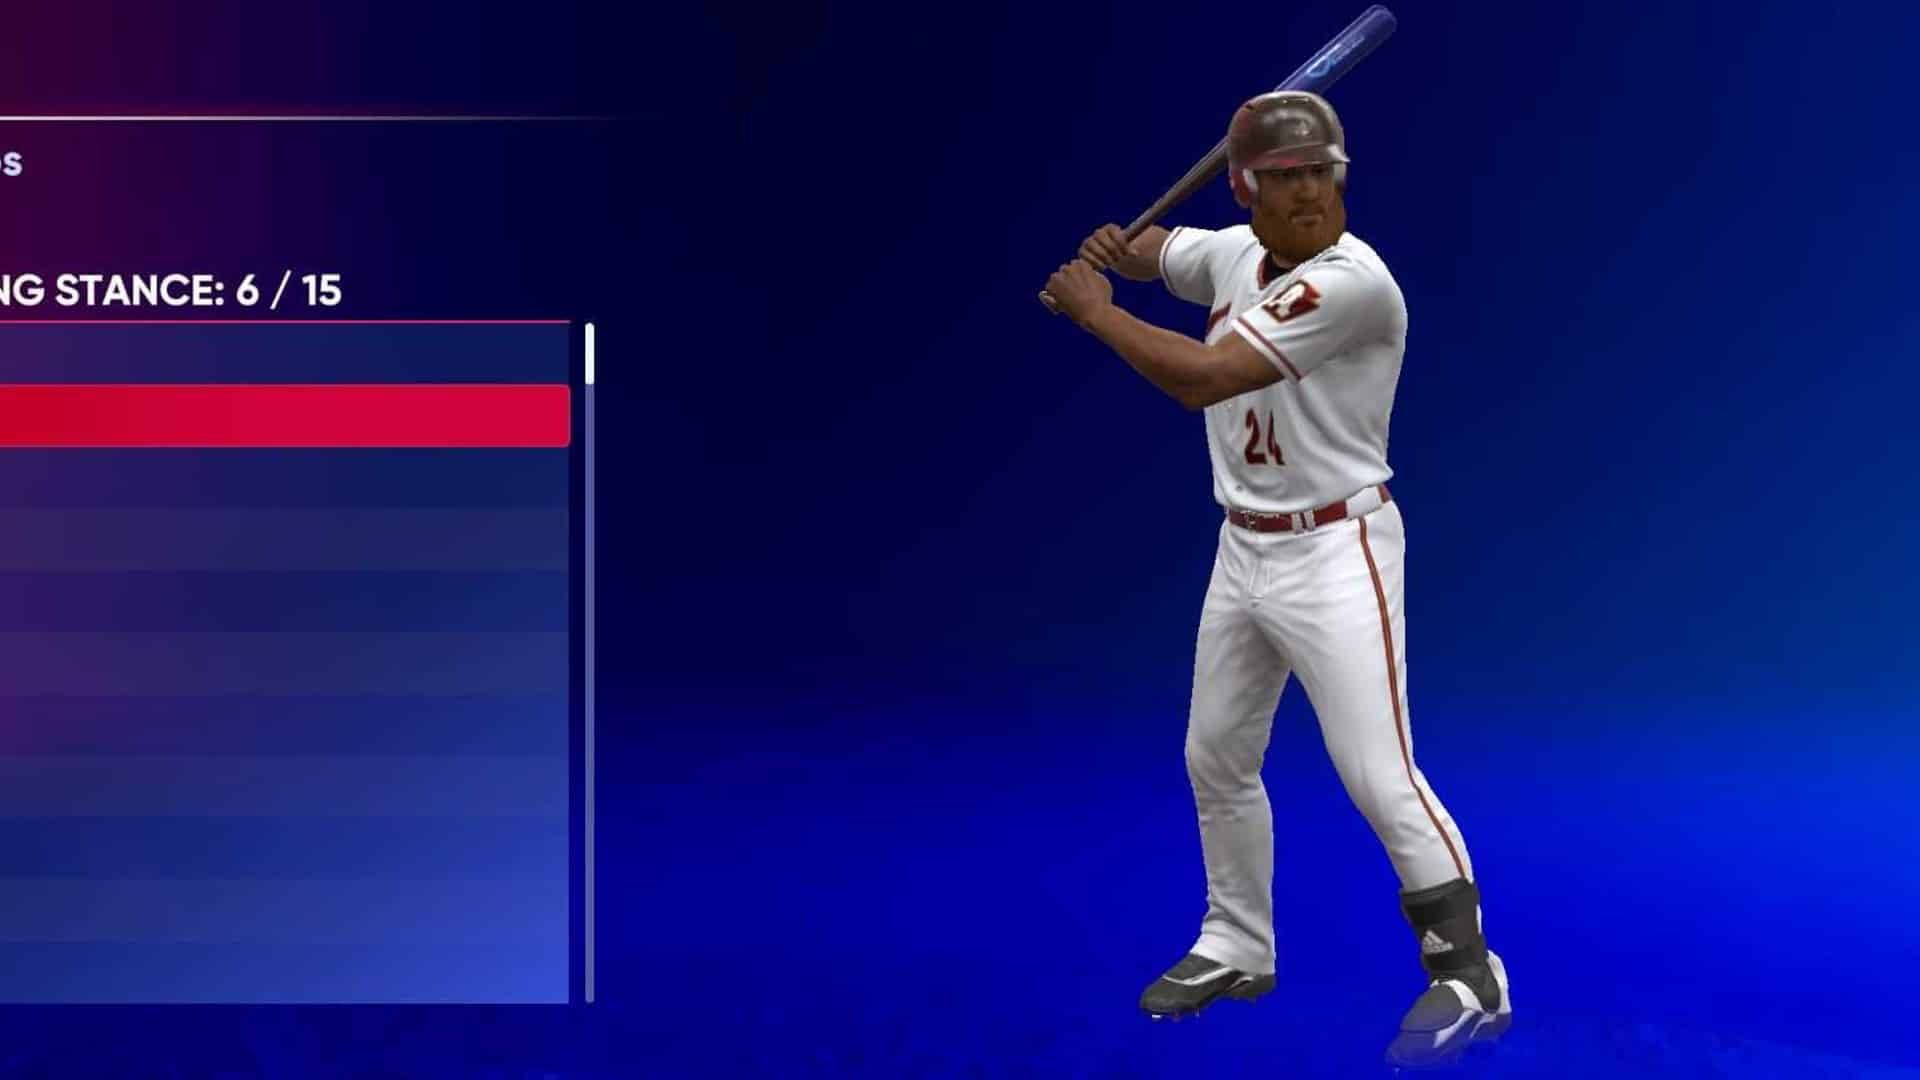 The Best Batting Stances in MLB The Show 23